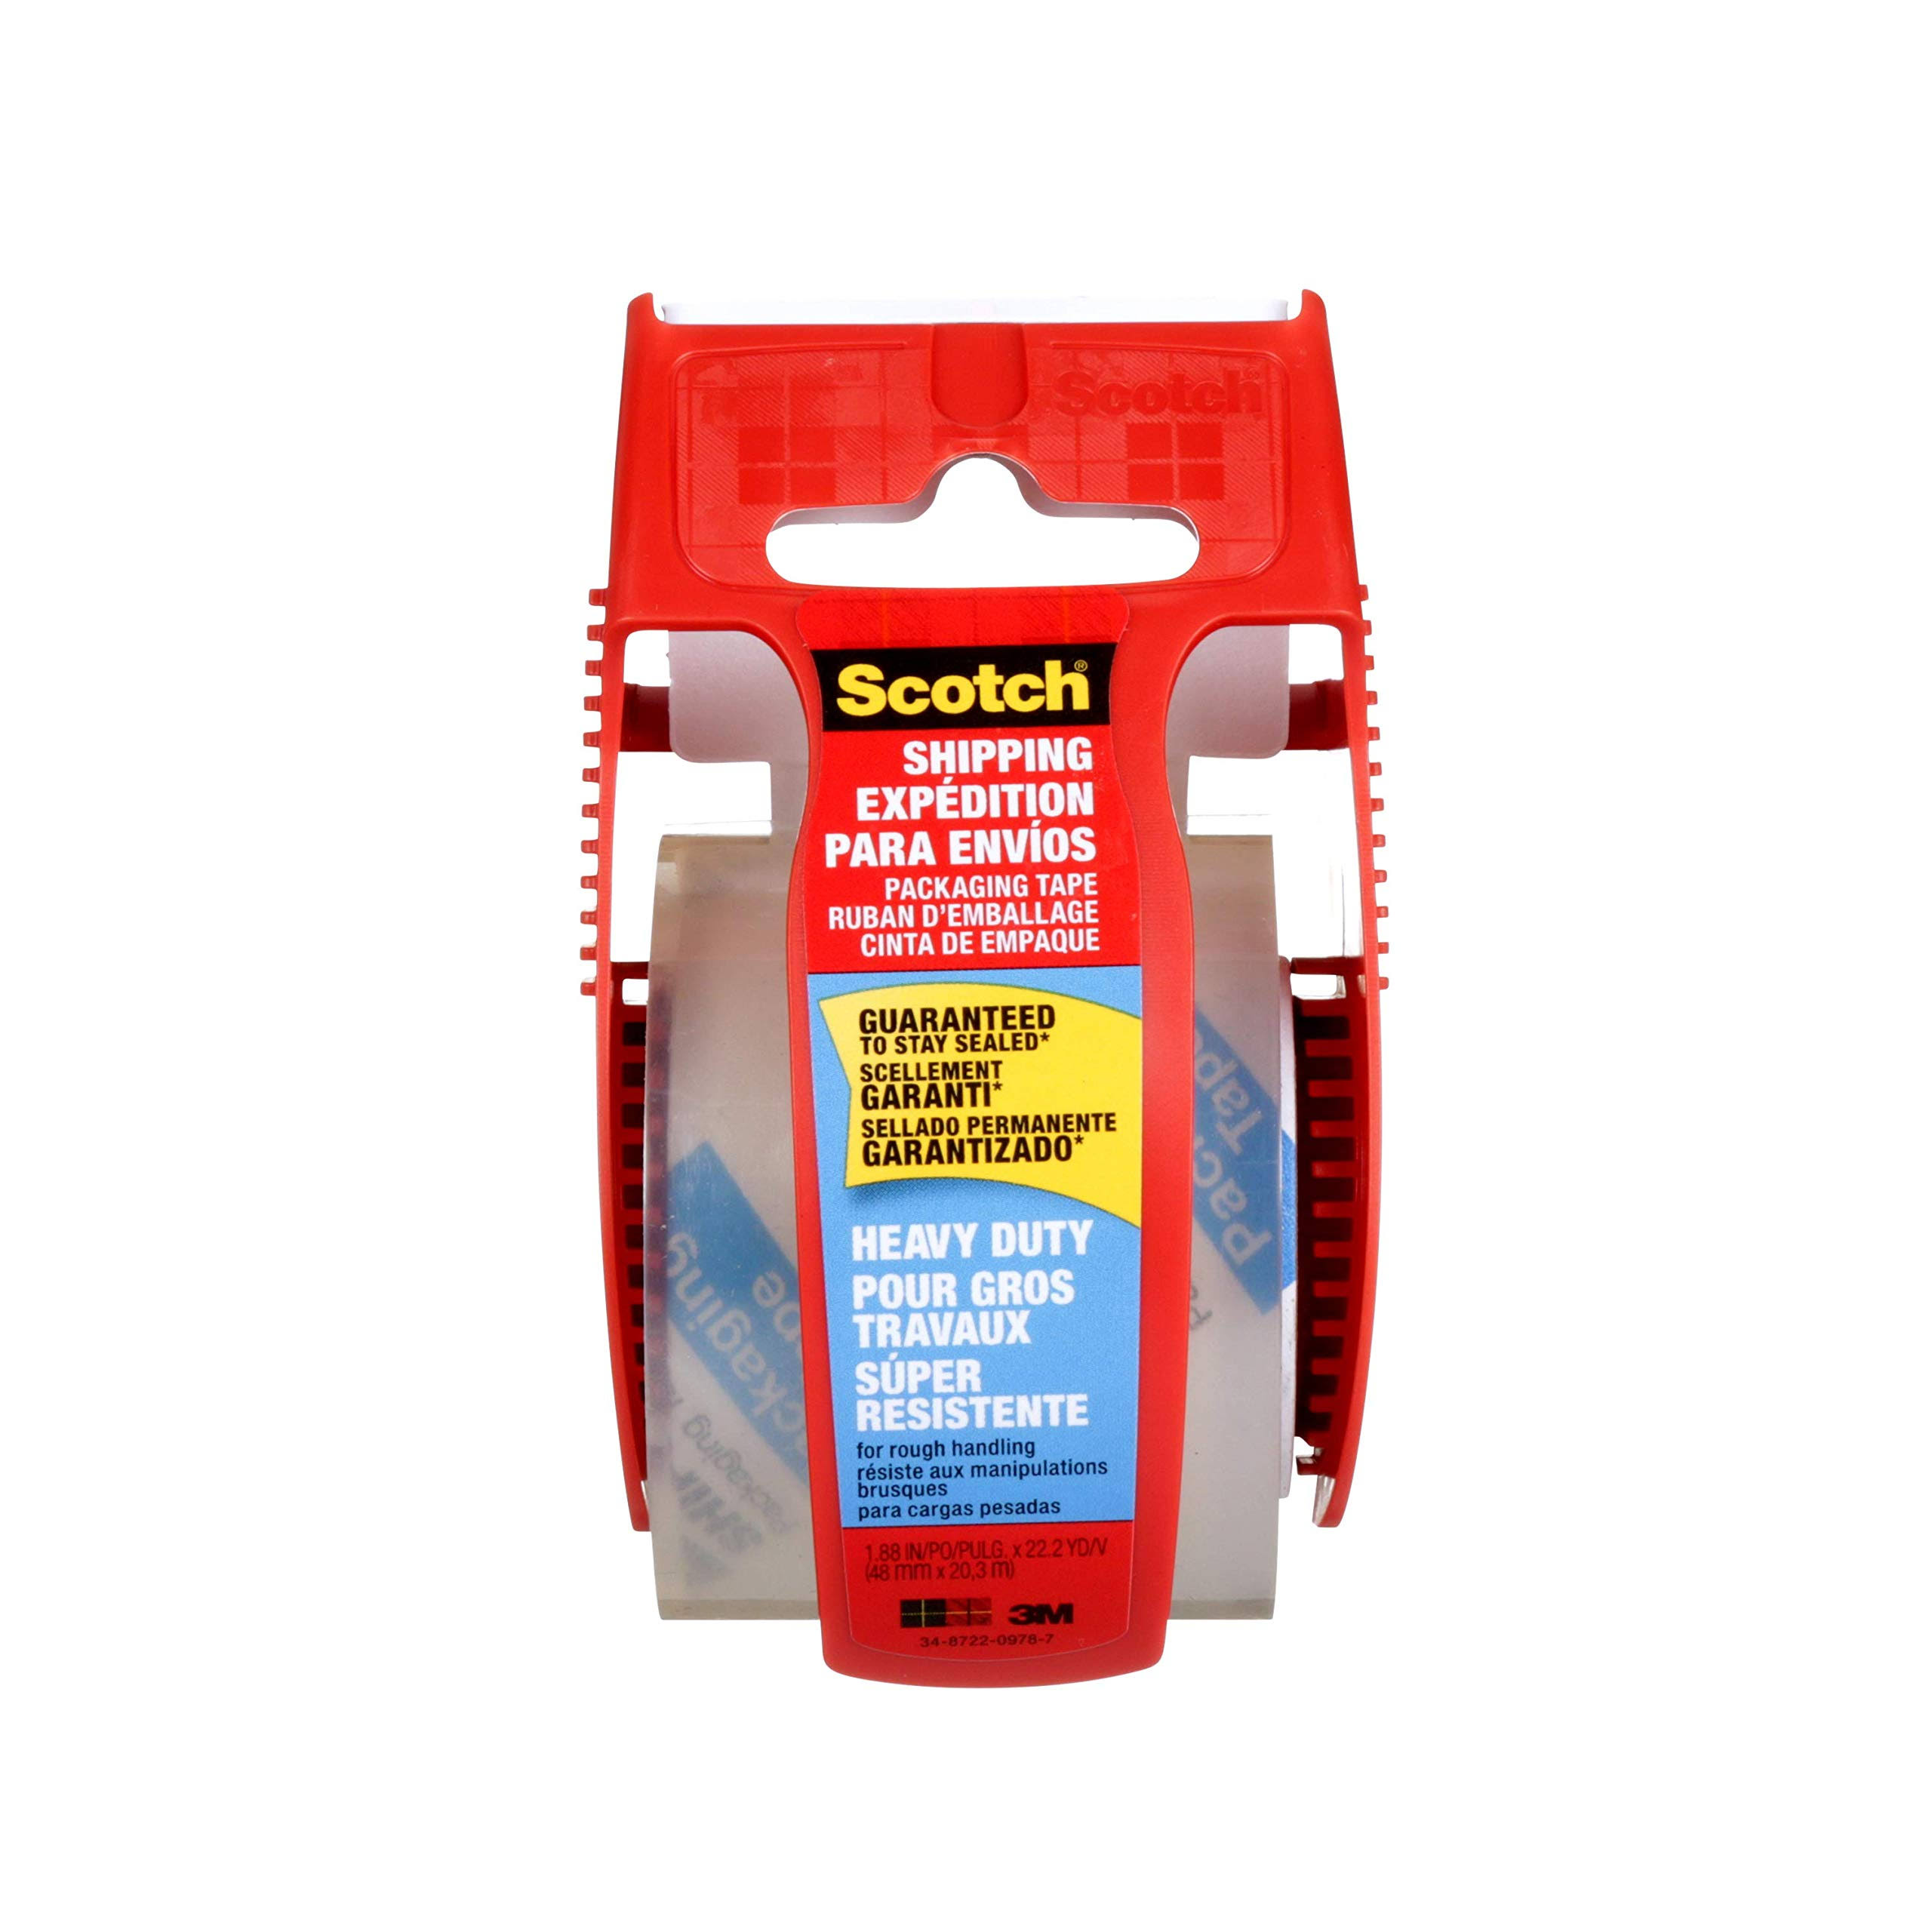 Scotch Heavy Duty Shipping Packaging Tape - Clear, 1.88" x 800"